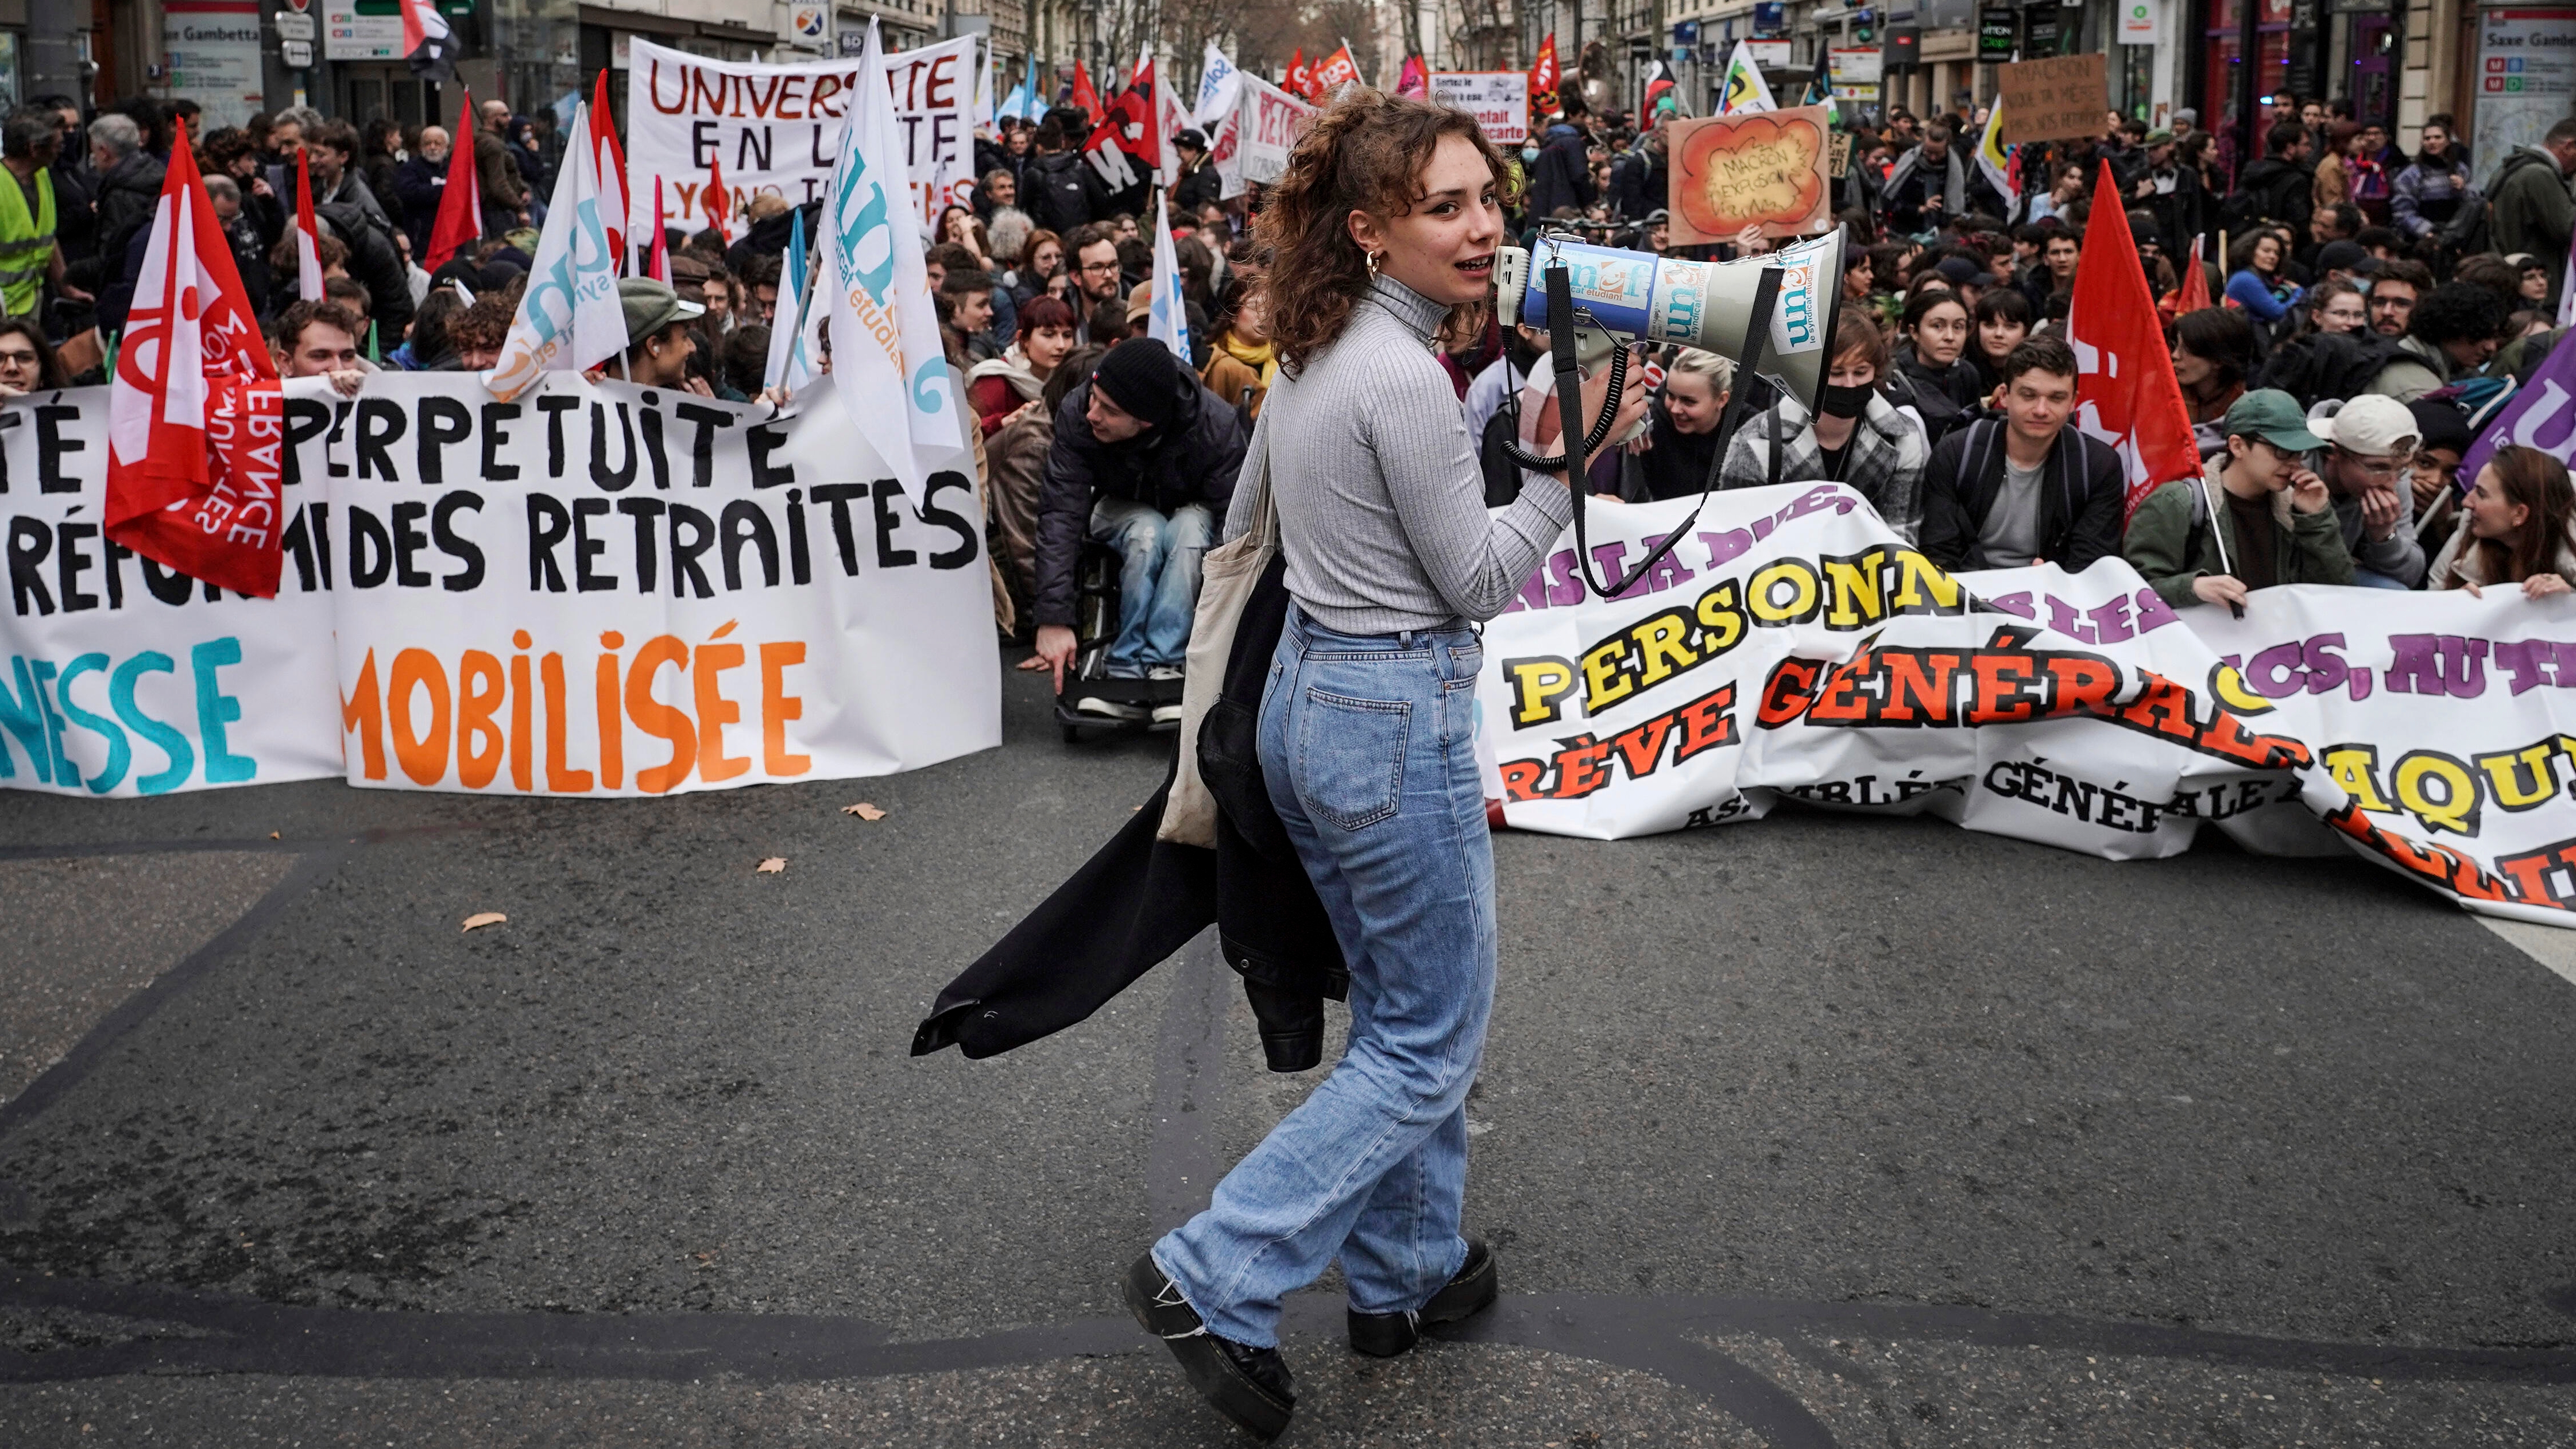 Students shout slogans during a protest in Lyon, central France, Thursday, March 9, 2023. Young people in France — including some who haven't even entered the job market yet — are protesting against the government's push to raise the retirement age. (AP Photo/Laurent Cipriani)